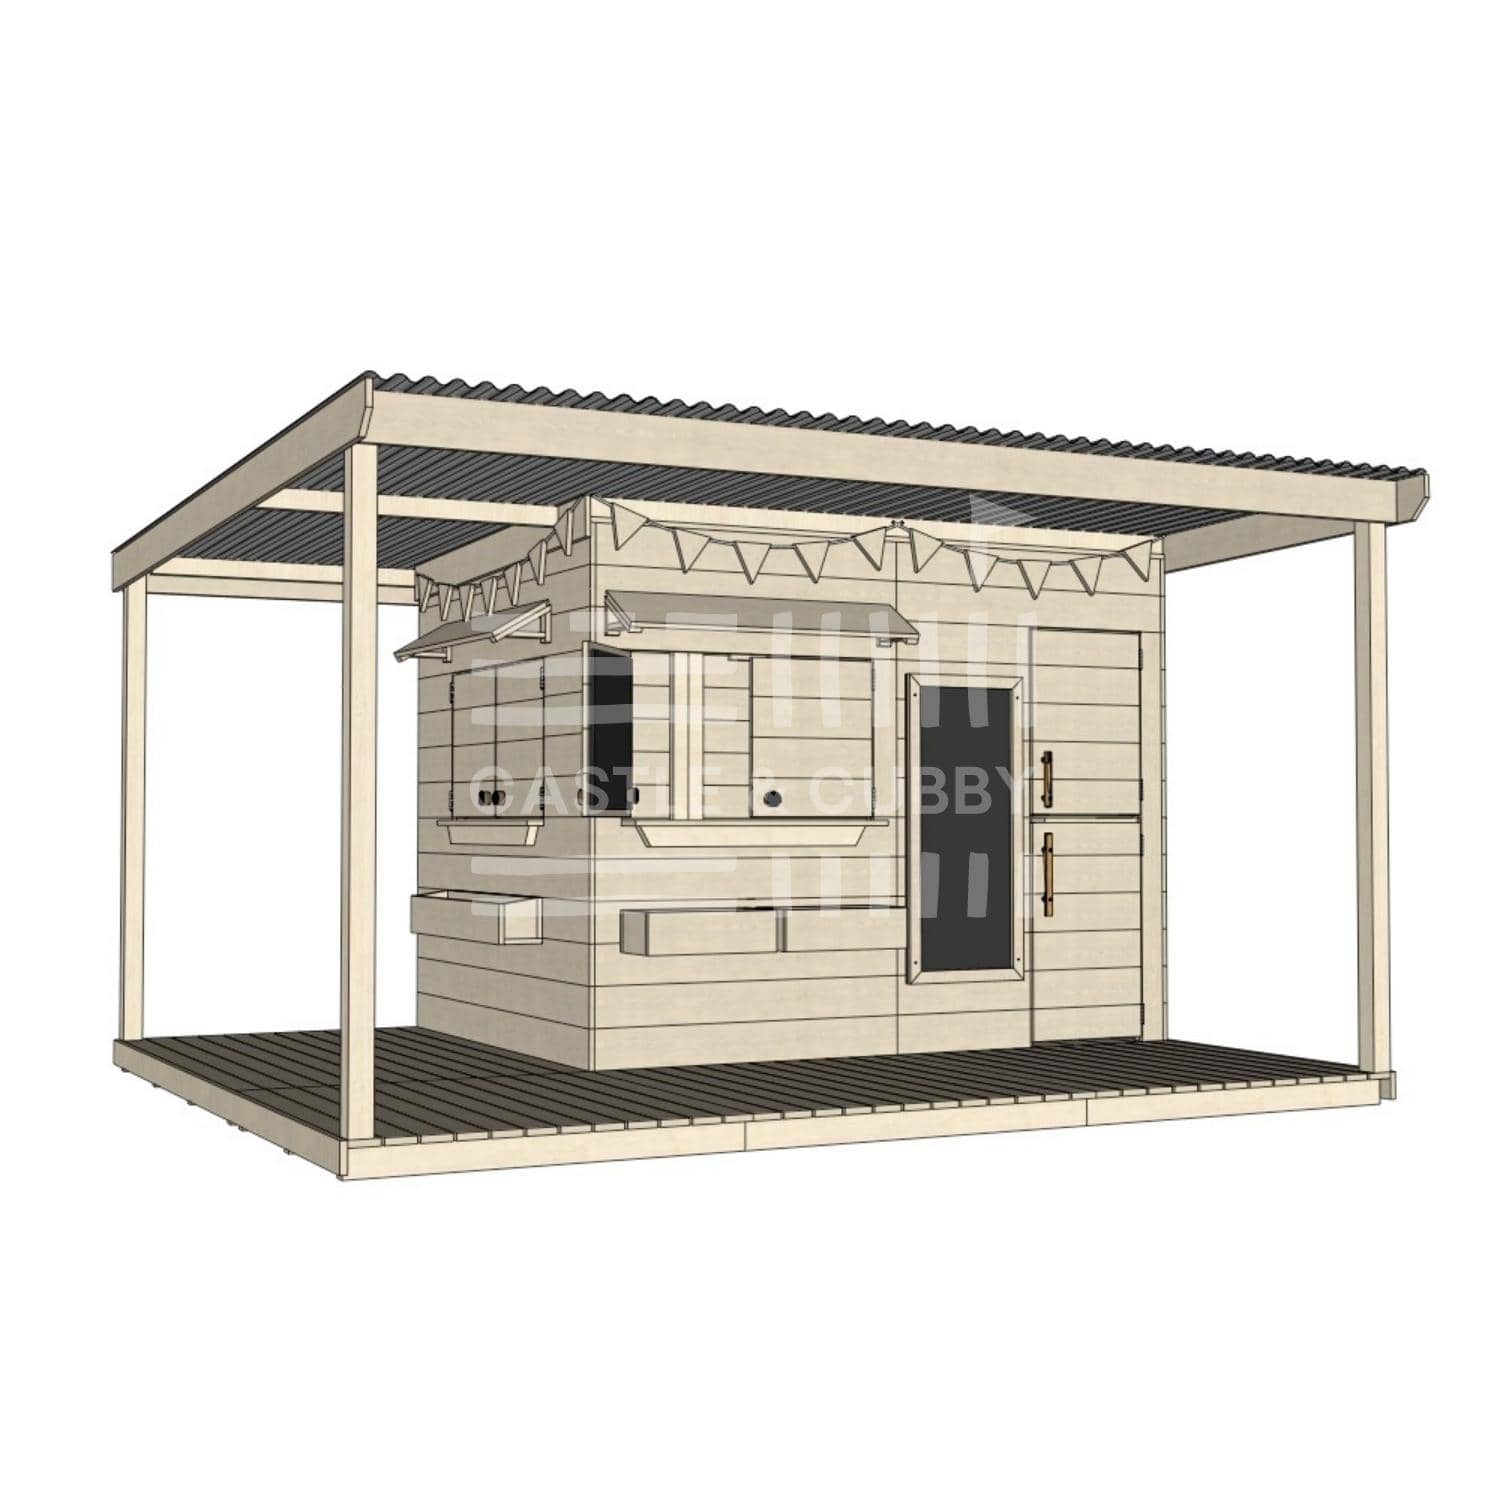 Pine timber extended height cubby house with wraparound verandah and deck for family gardens large rectangle size with accessories